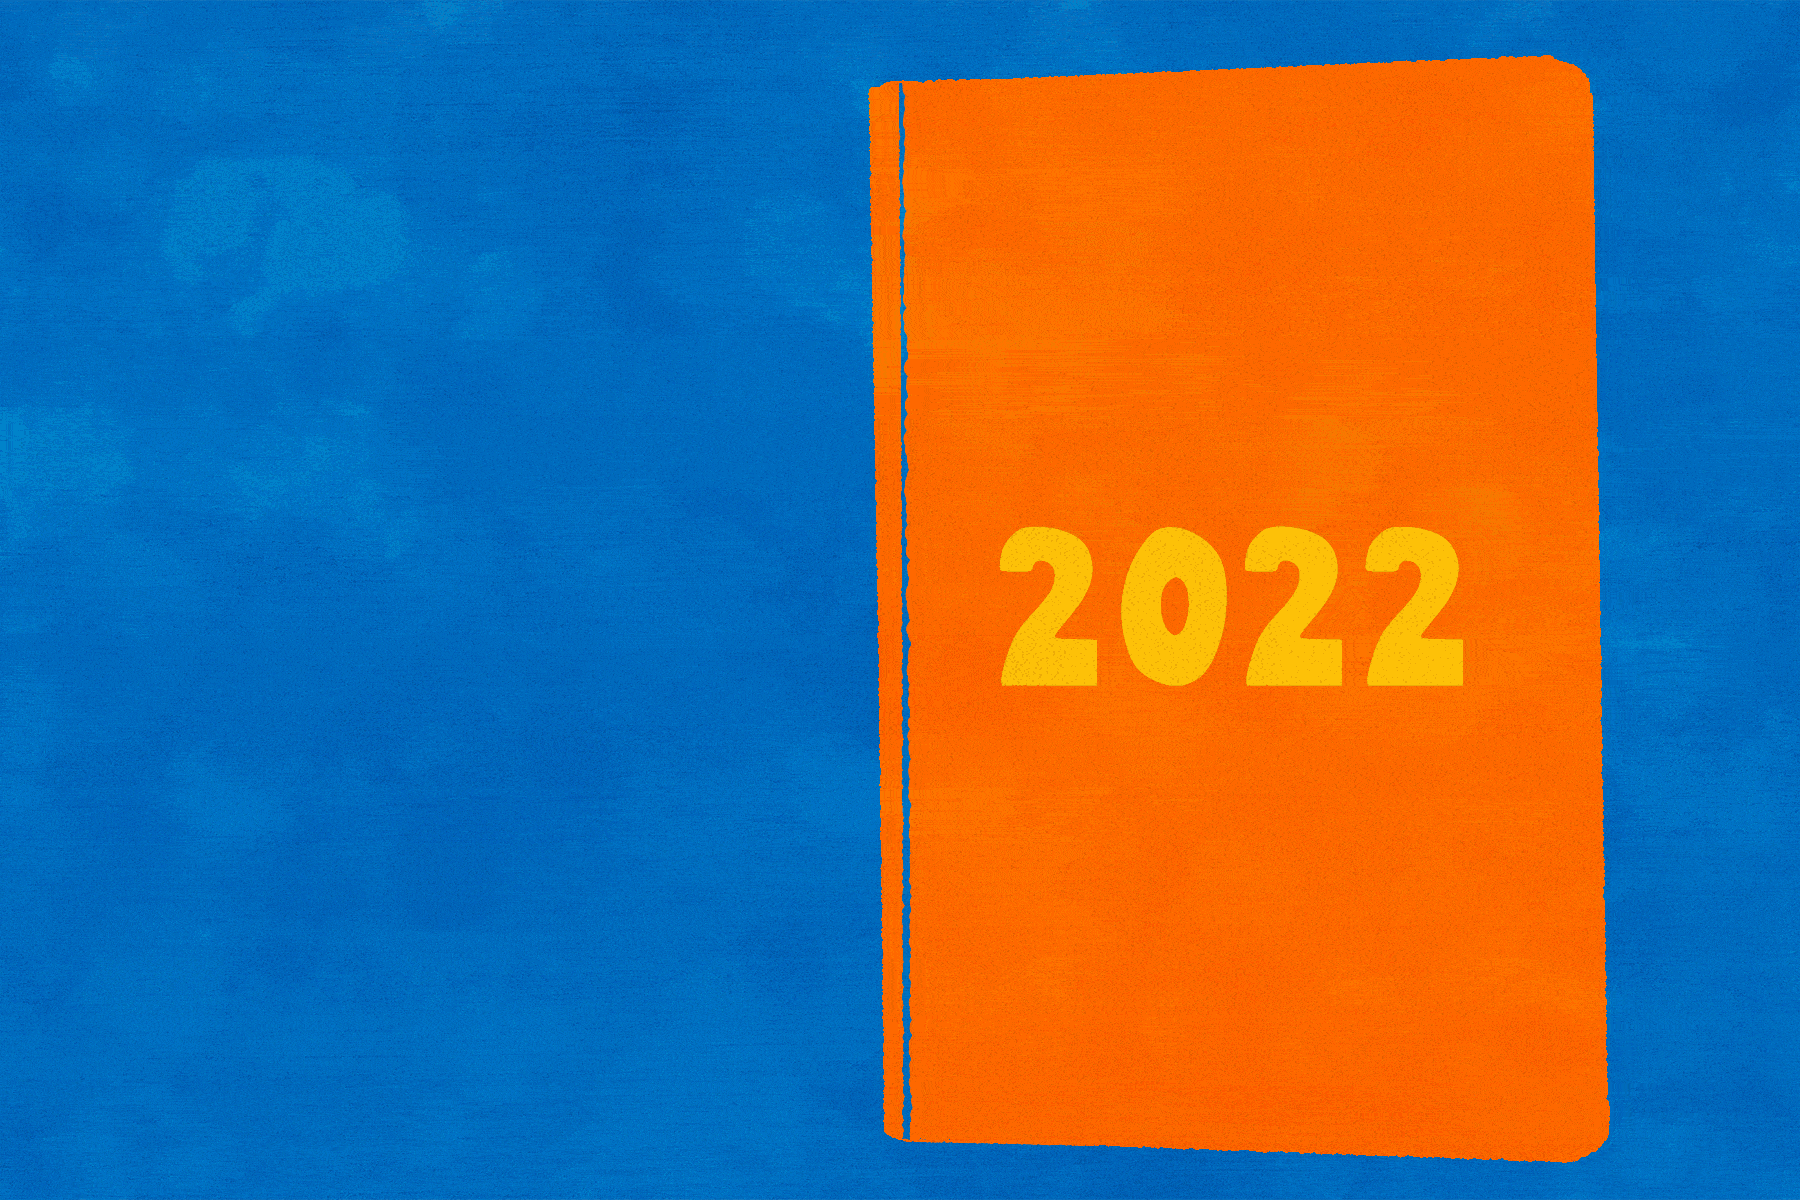 A moving gif of an orange and yellow book on a blue background. The book is called '2022' and opens to show illustrations of a ball of wool, a burning planet, and a person doing yoga